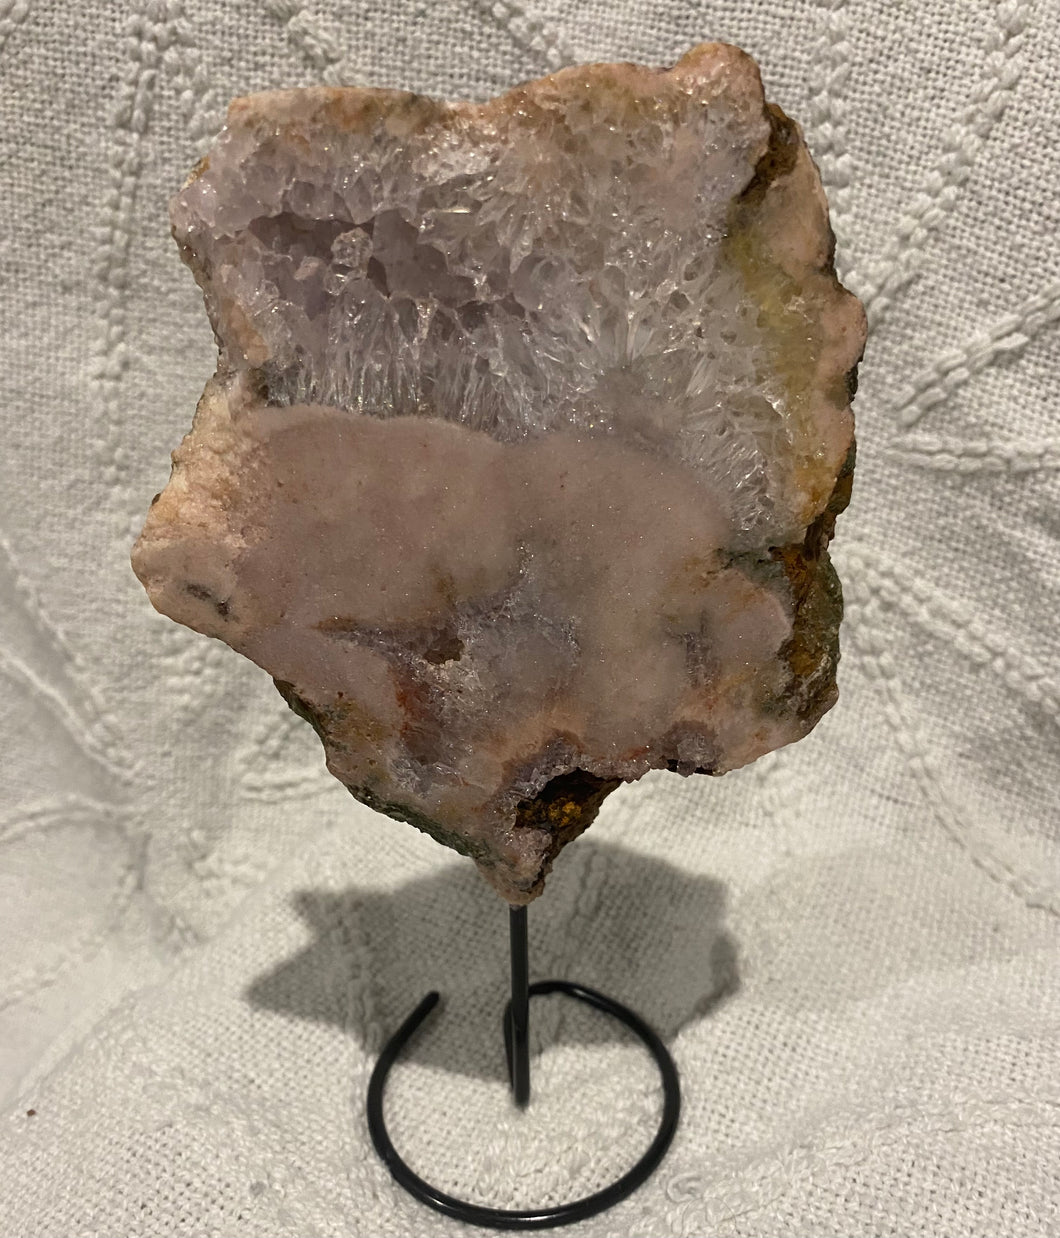 Pink Amethyst on stand